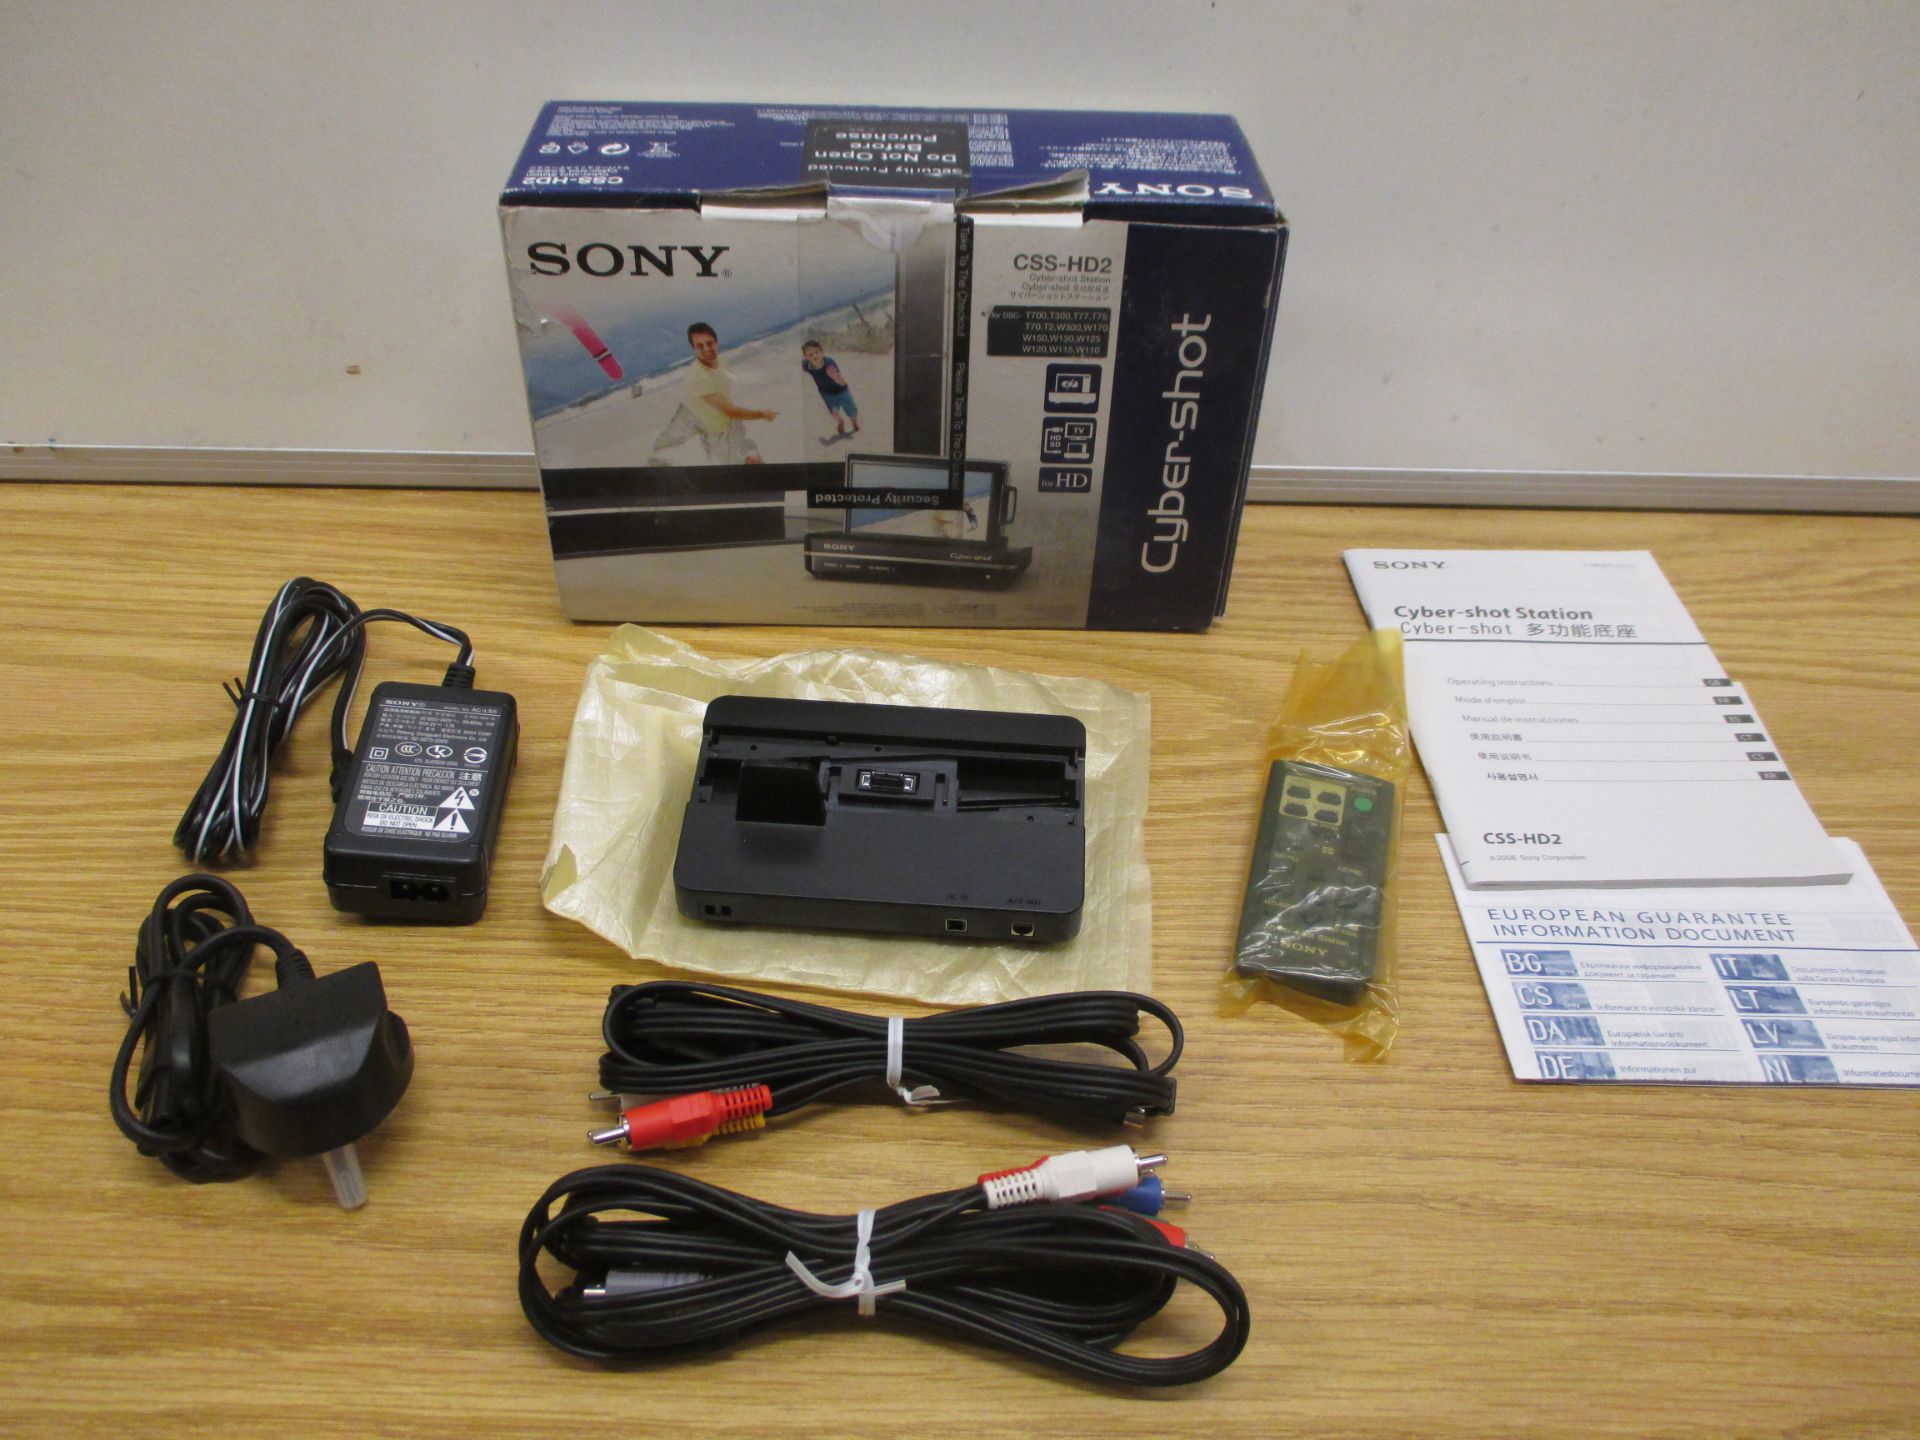 SONY CYBERSHOT STATION CSS-HD2. BOXED WITH INSTRUCTIONS, PSU, REMOTE CONTROL & CABLES.